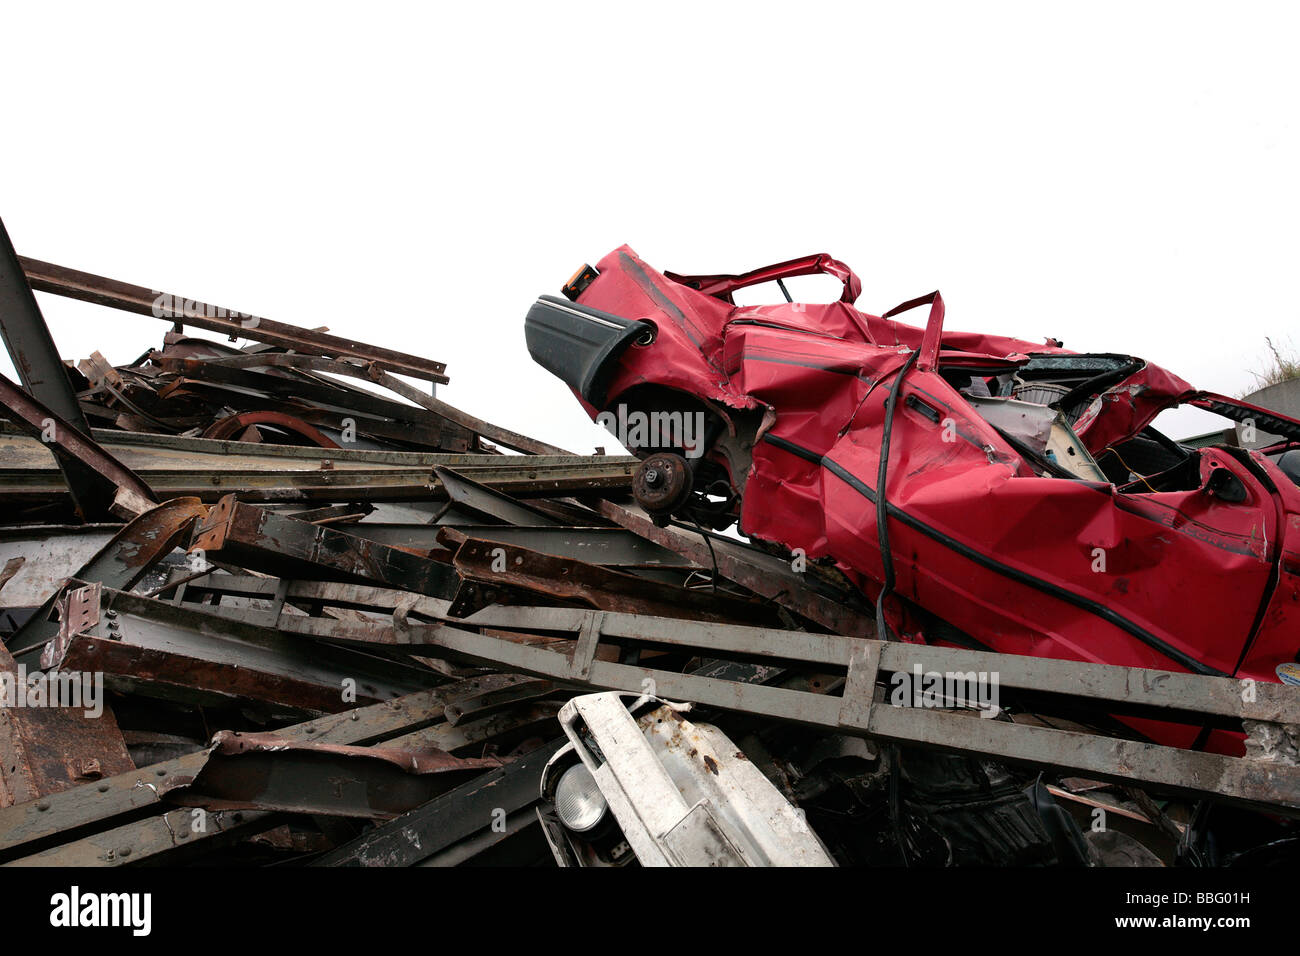 Scrapped cars Stock Photo